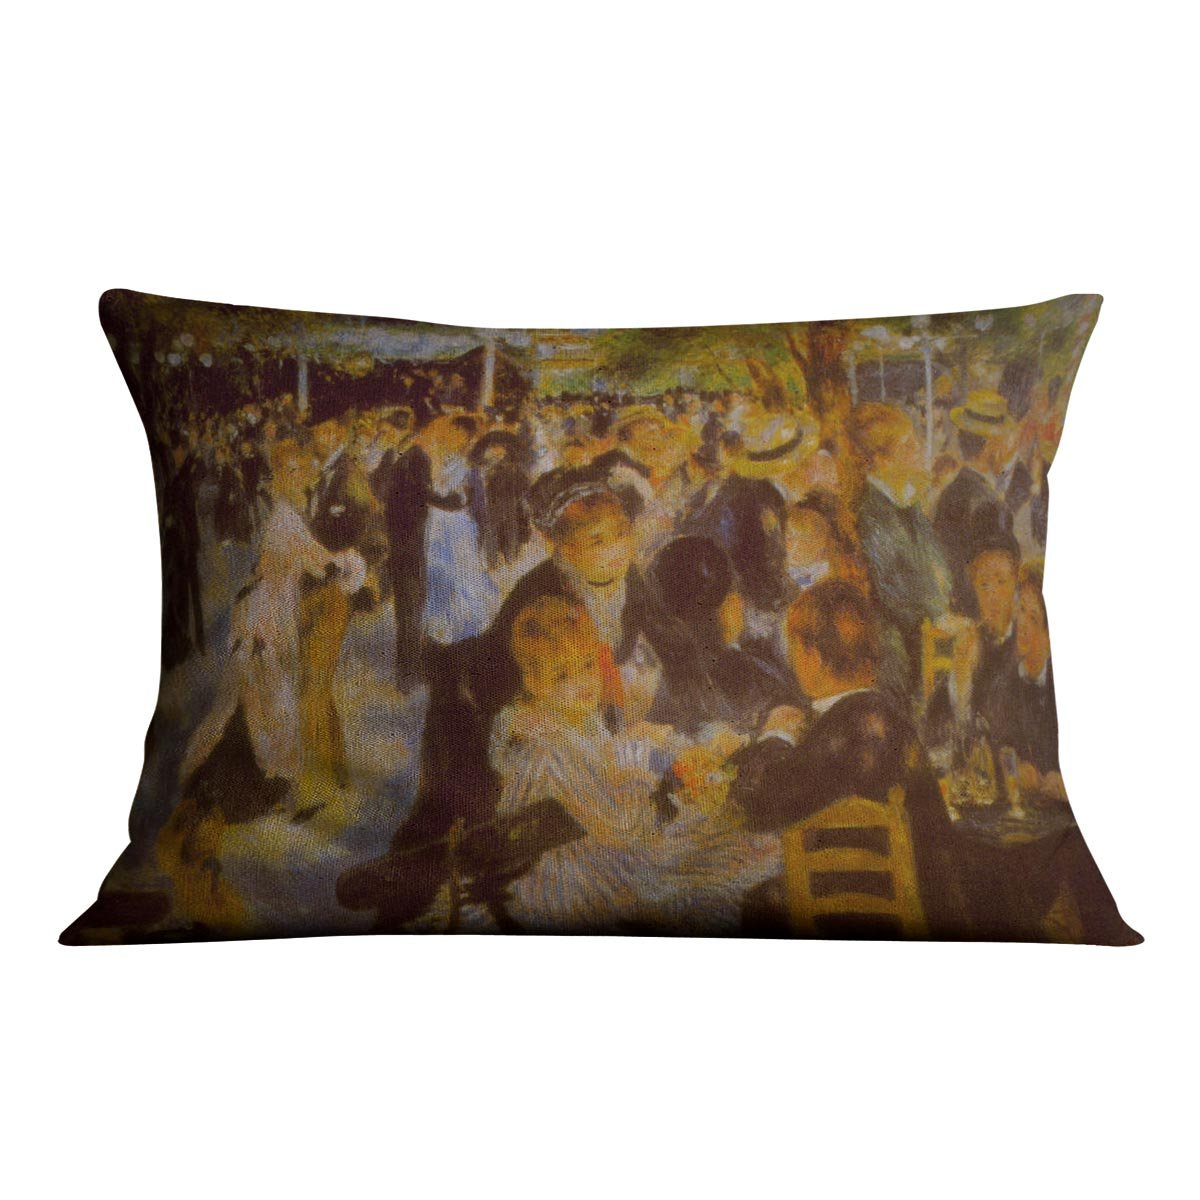 Moulin Galette by Renoir Throw Pillow